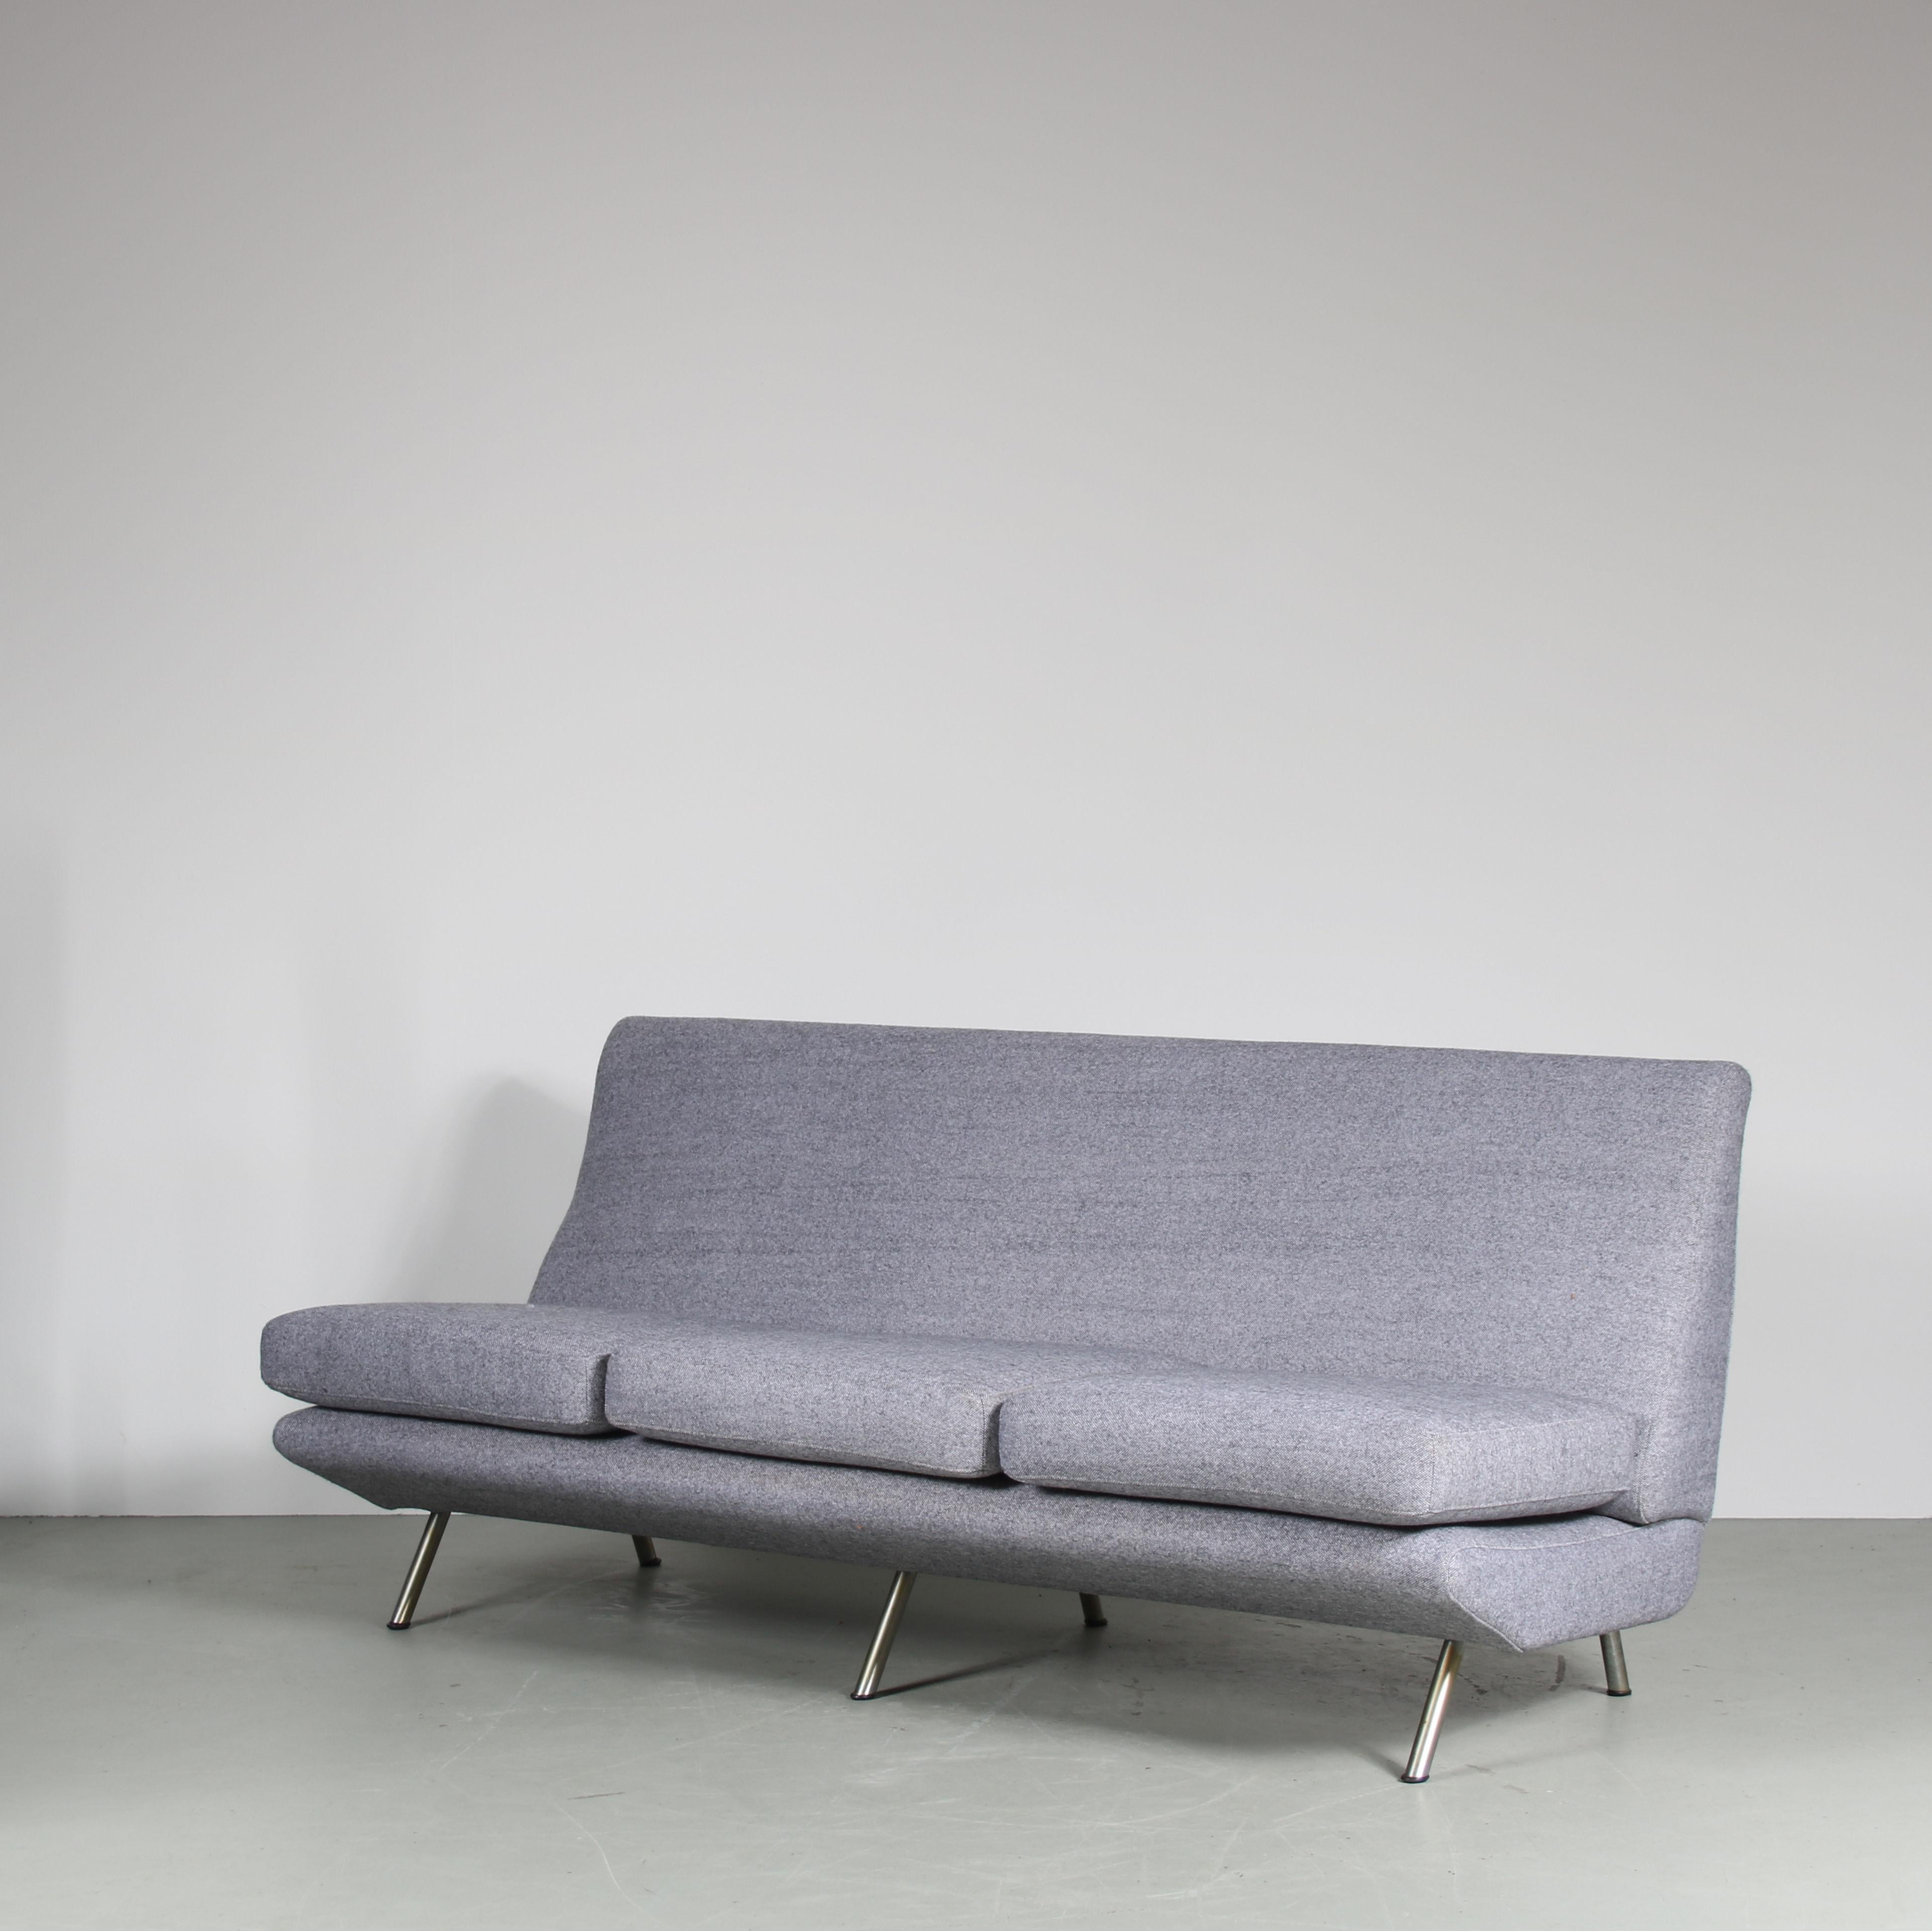 A stunning 3-seater sofa designed by Marco Zanuso, manufactured by Arflex in Italy around 1950.

This eye-catching sofa is newly upholstered in grey fabric. The outwards tilted, tubular metal legs add nicely to it’s elegant style. It has three